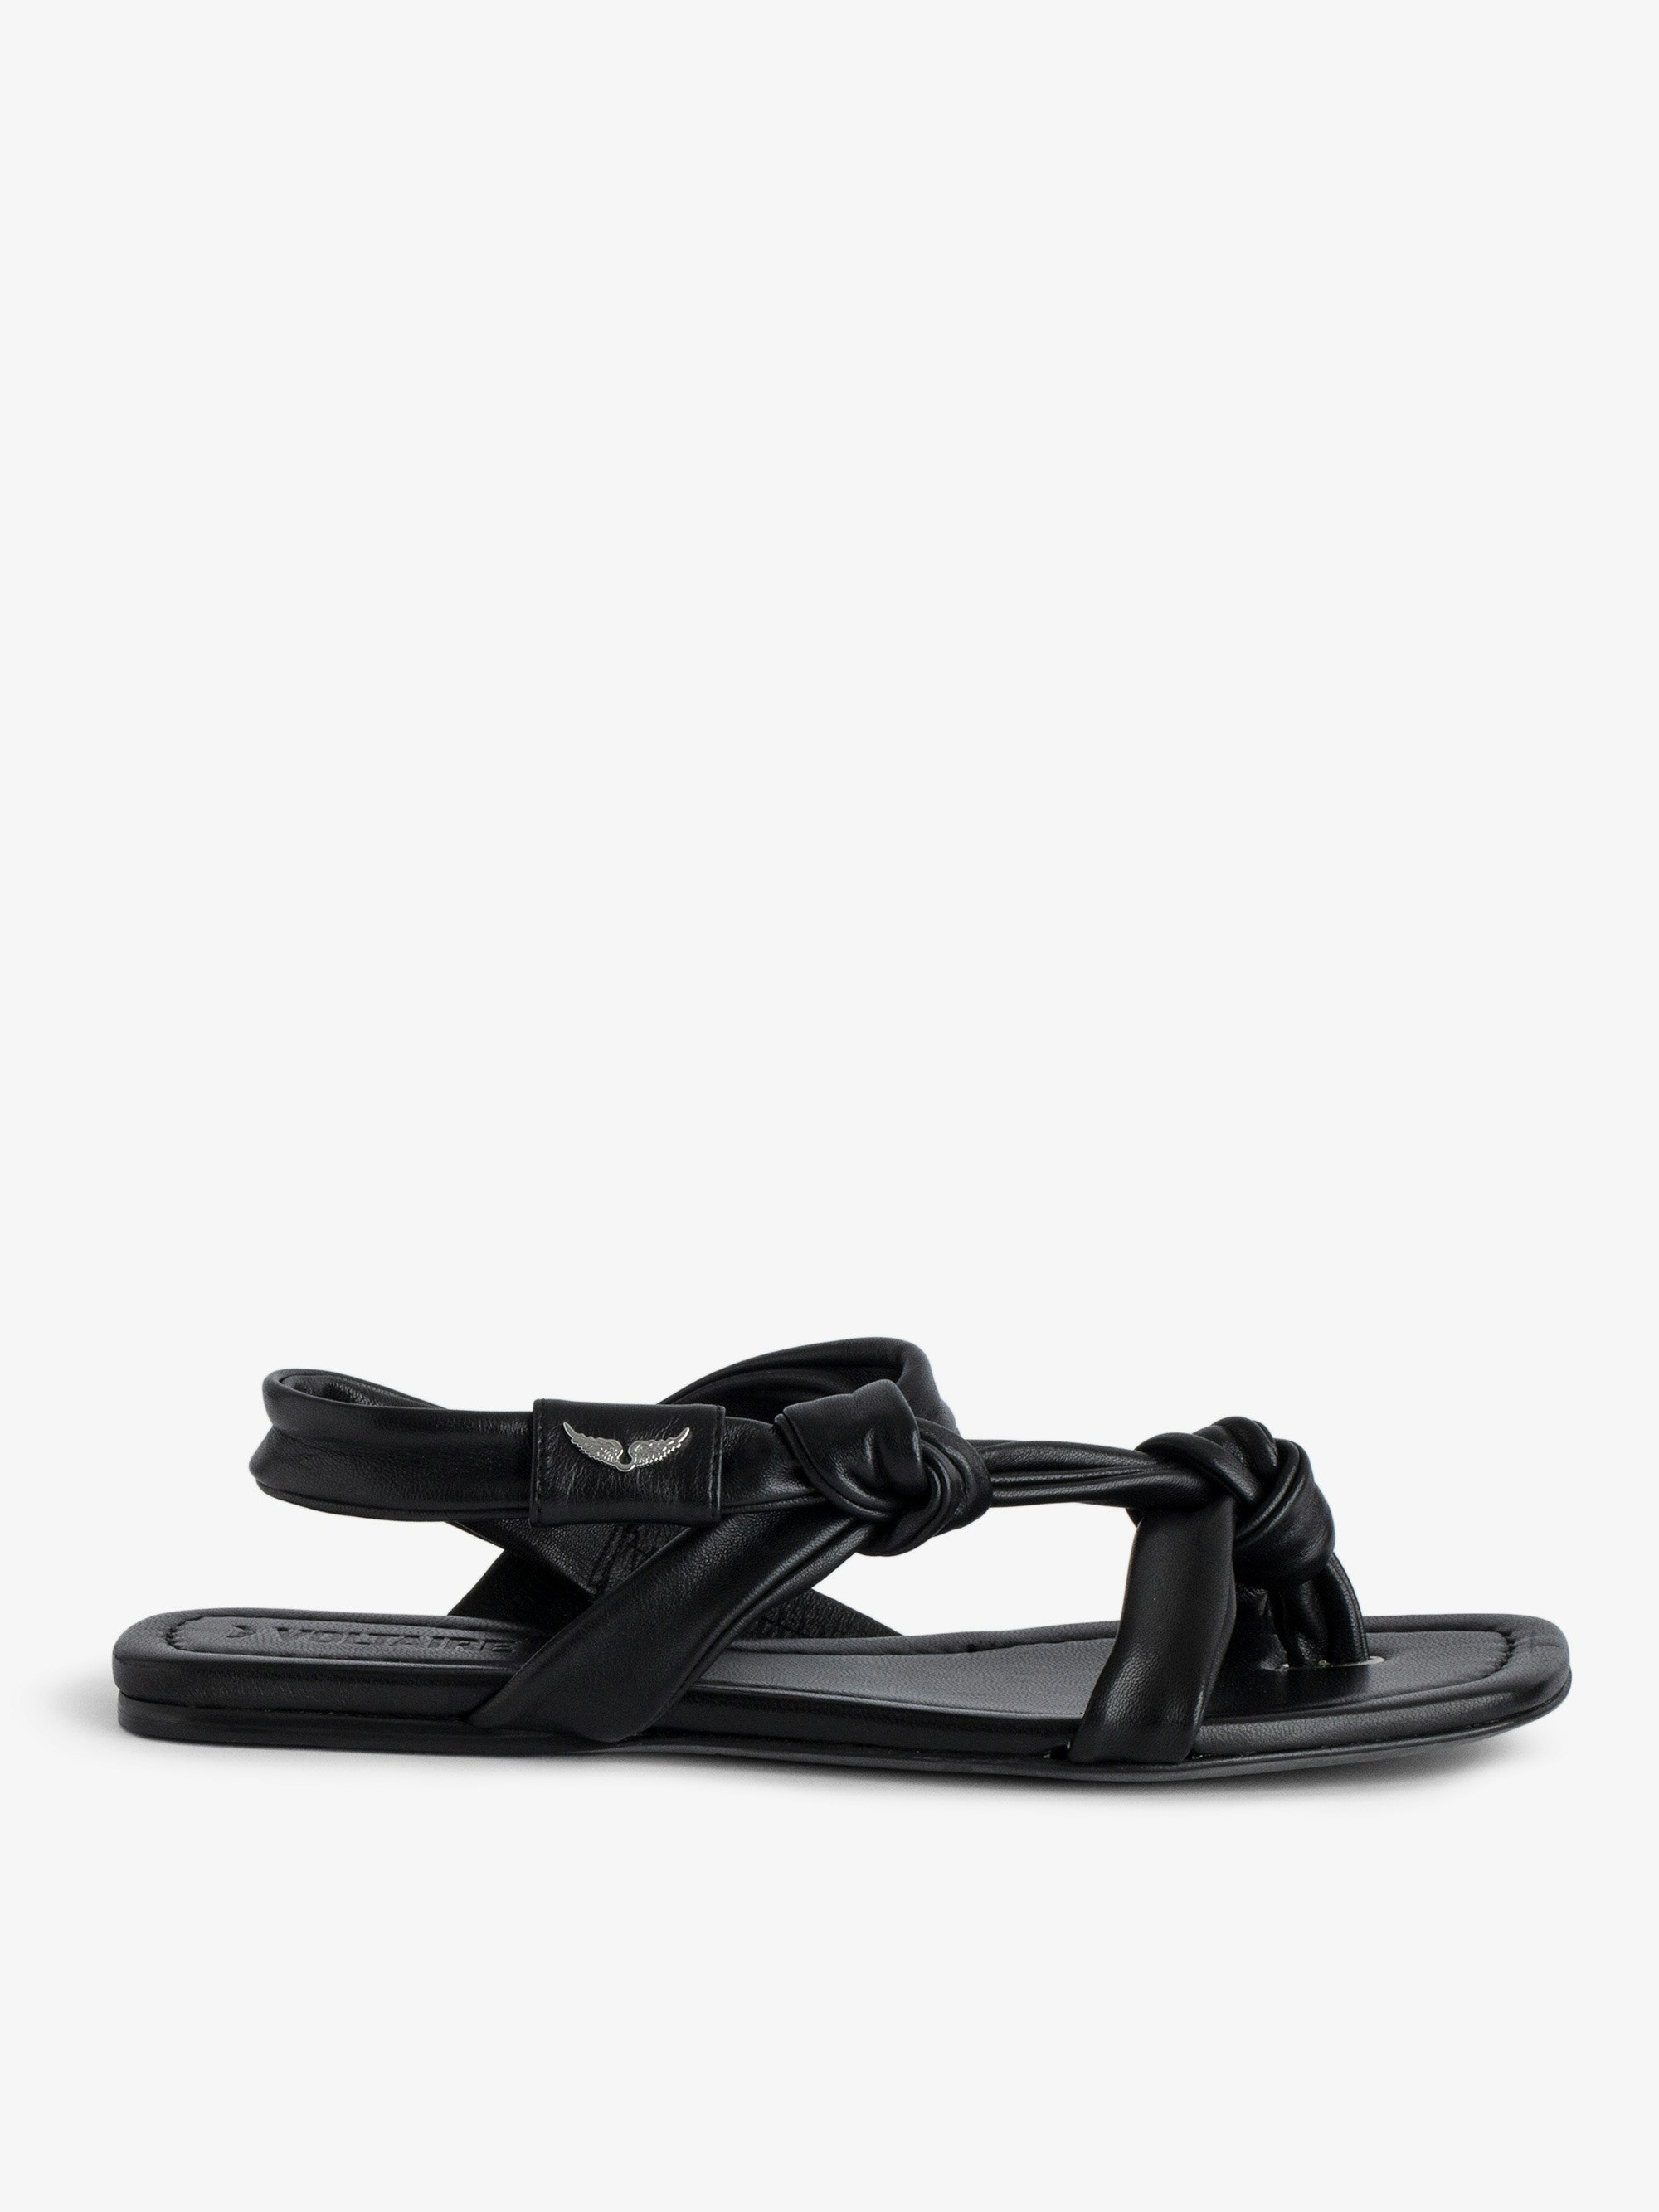 Forget Me Knot Sandals - Women's black  flat leather sandals with wing motifs.